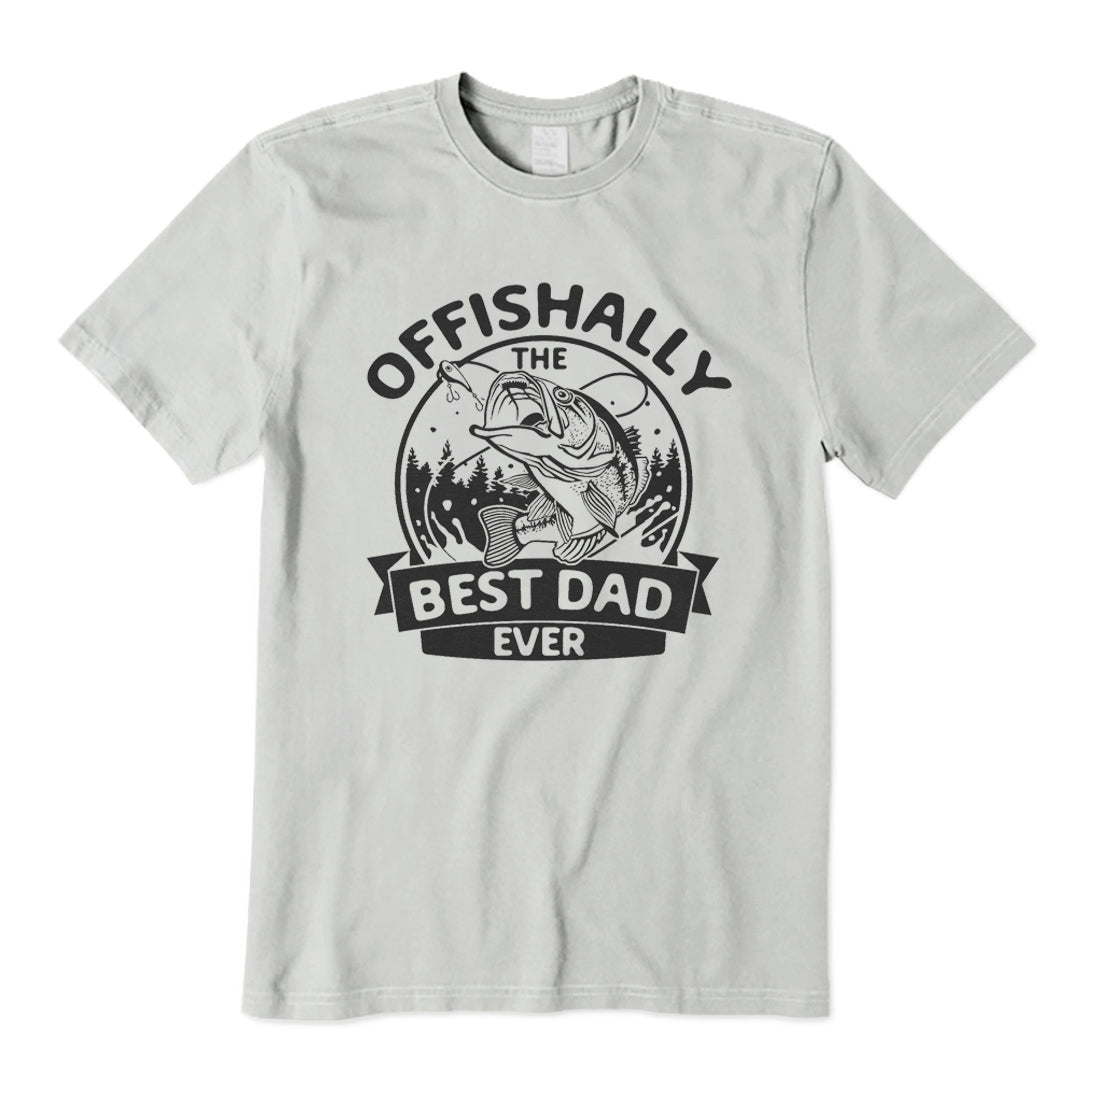 Offishally The Best Dad Ever T-Shirt